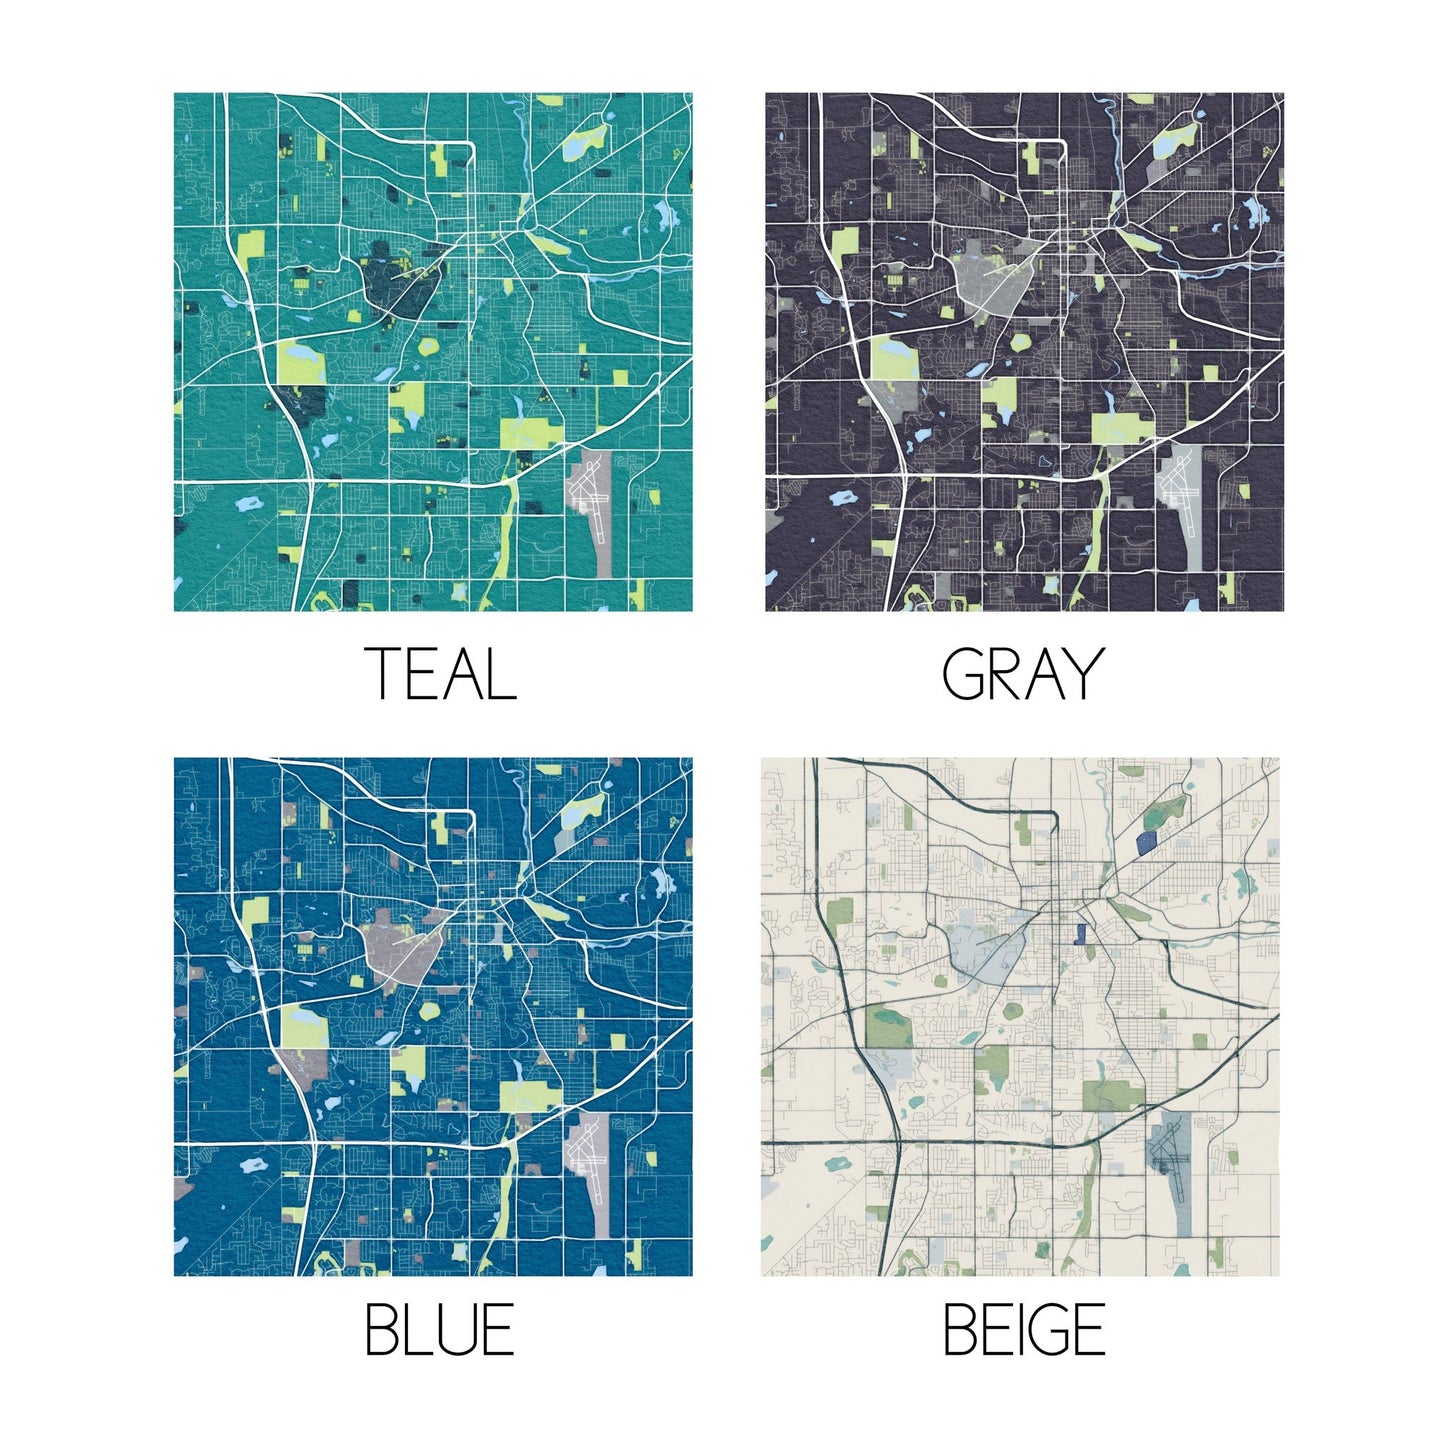 Examples of all four colors available for city maps: beige, blue, gray, and teal